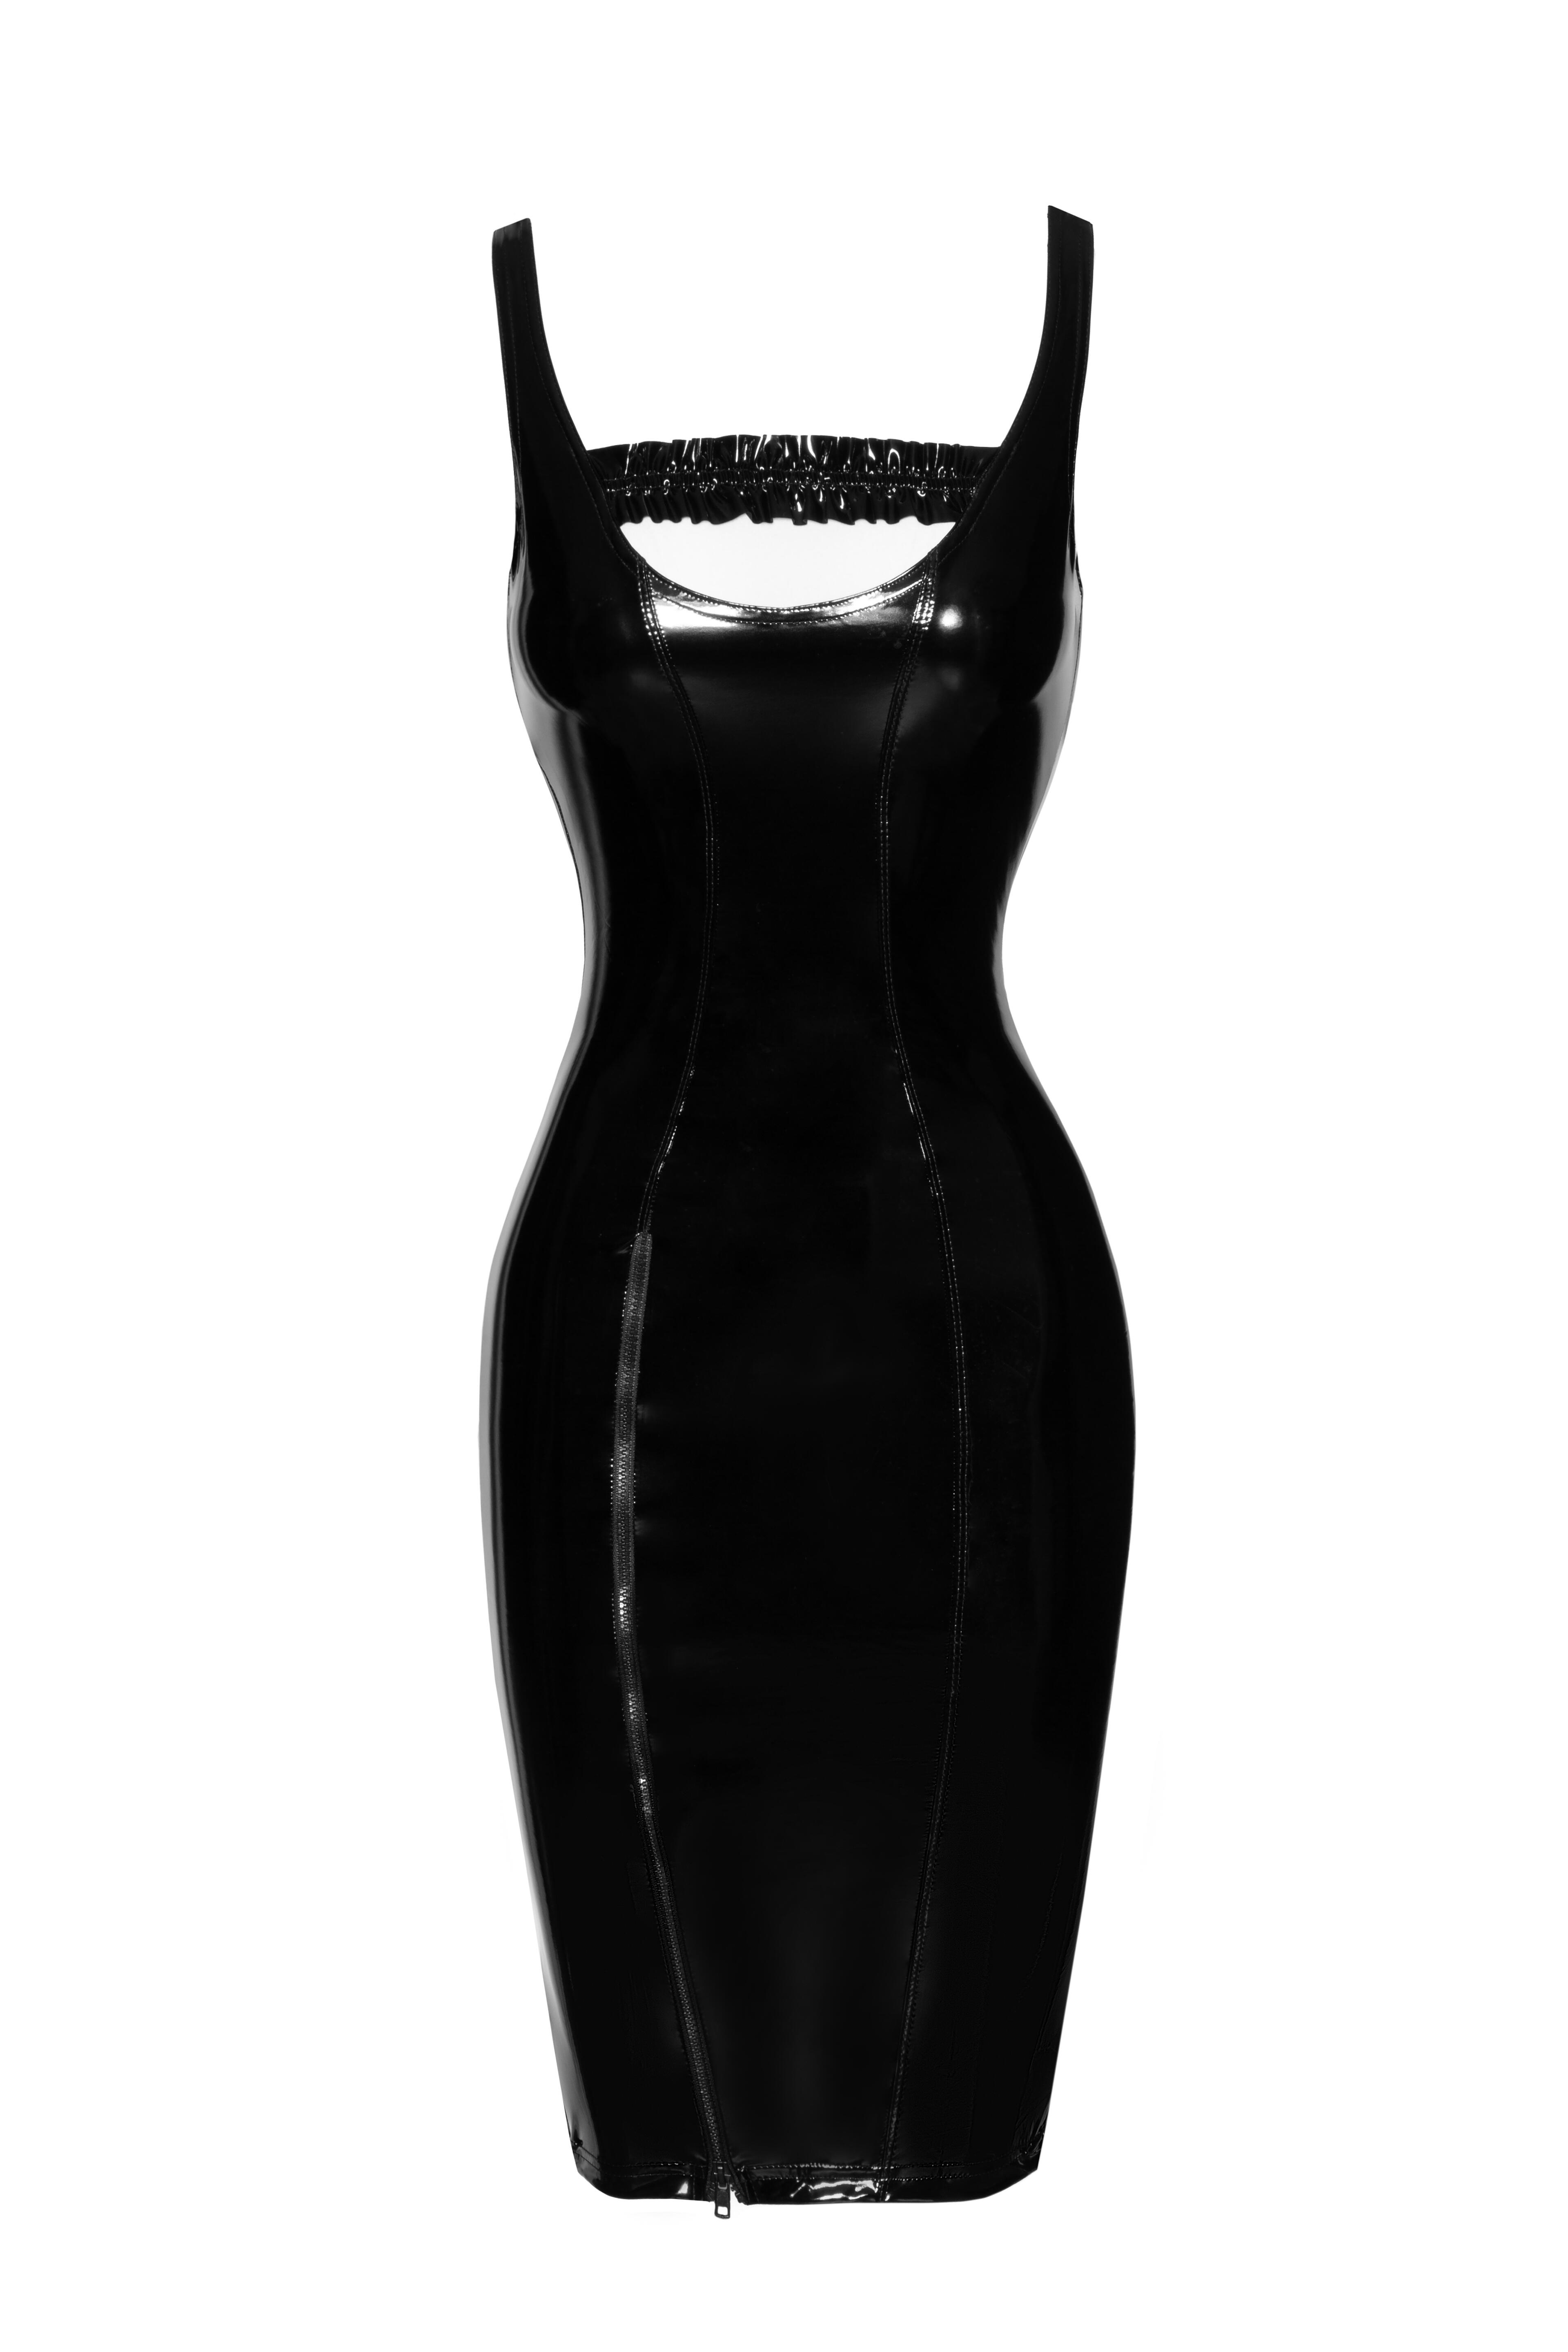 Patent Leather PVC Midi Dress from the front